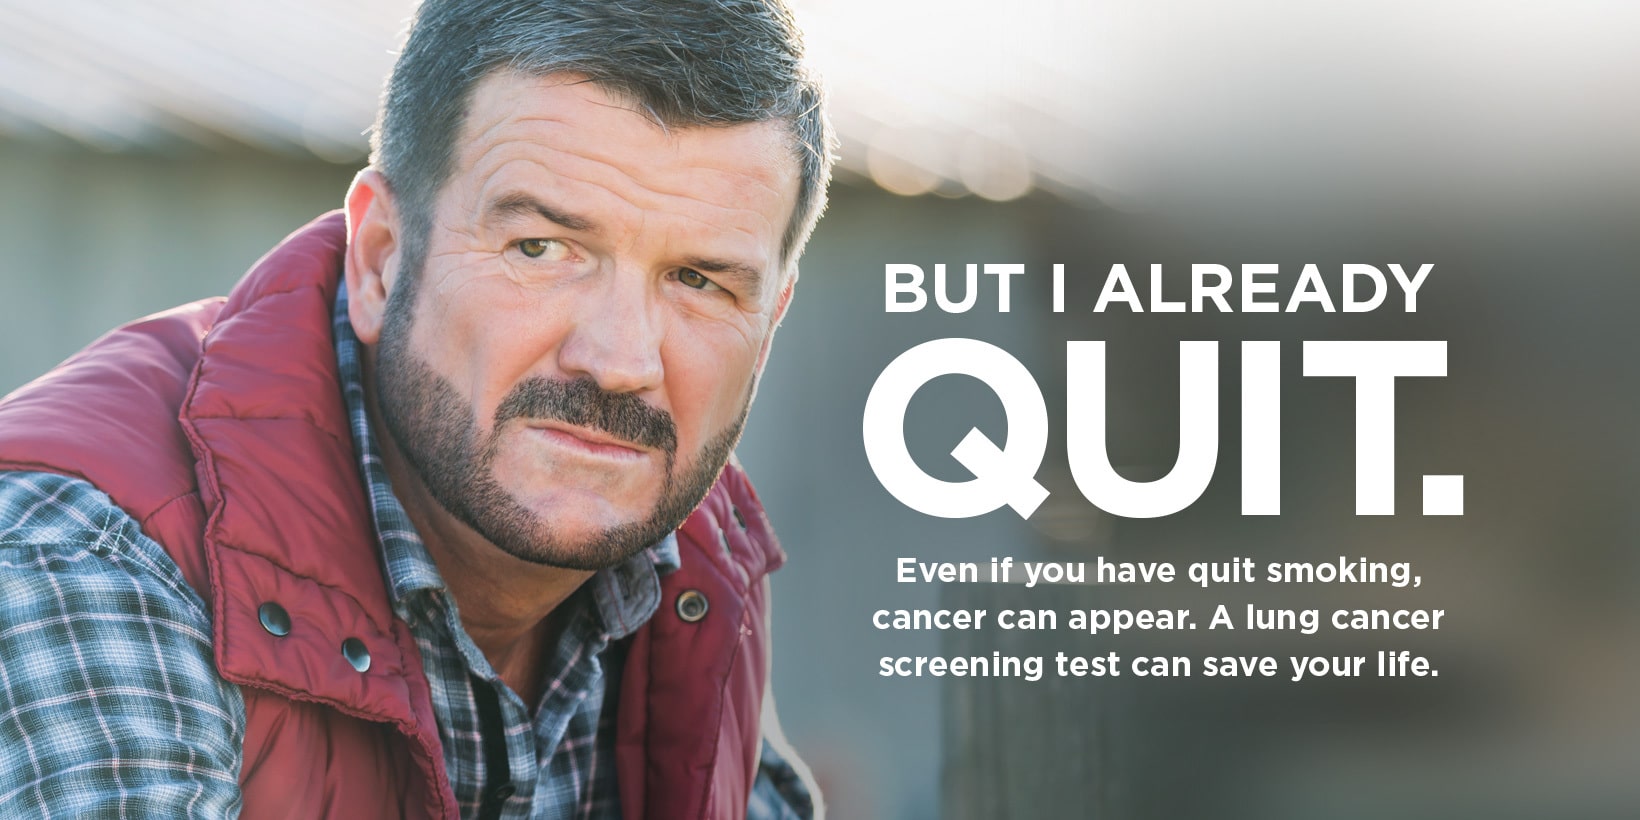 But I already quite. Even if you have quit smoking, cancer can appear. A lung cancer screening test can save your life.